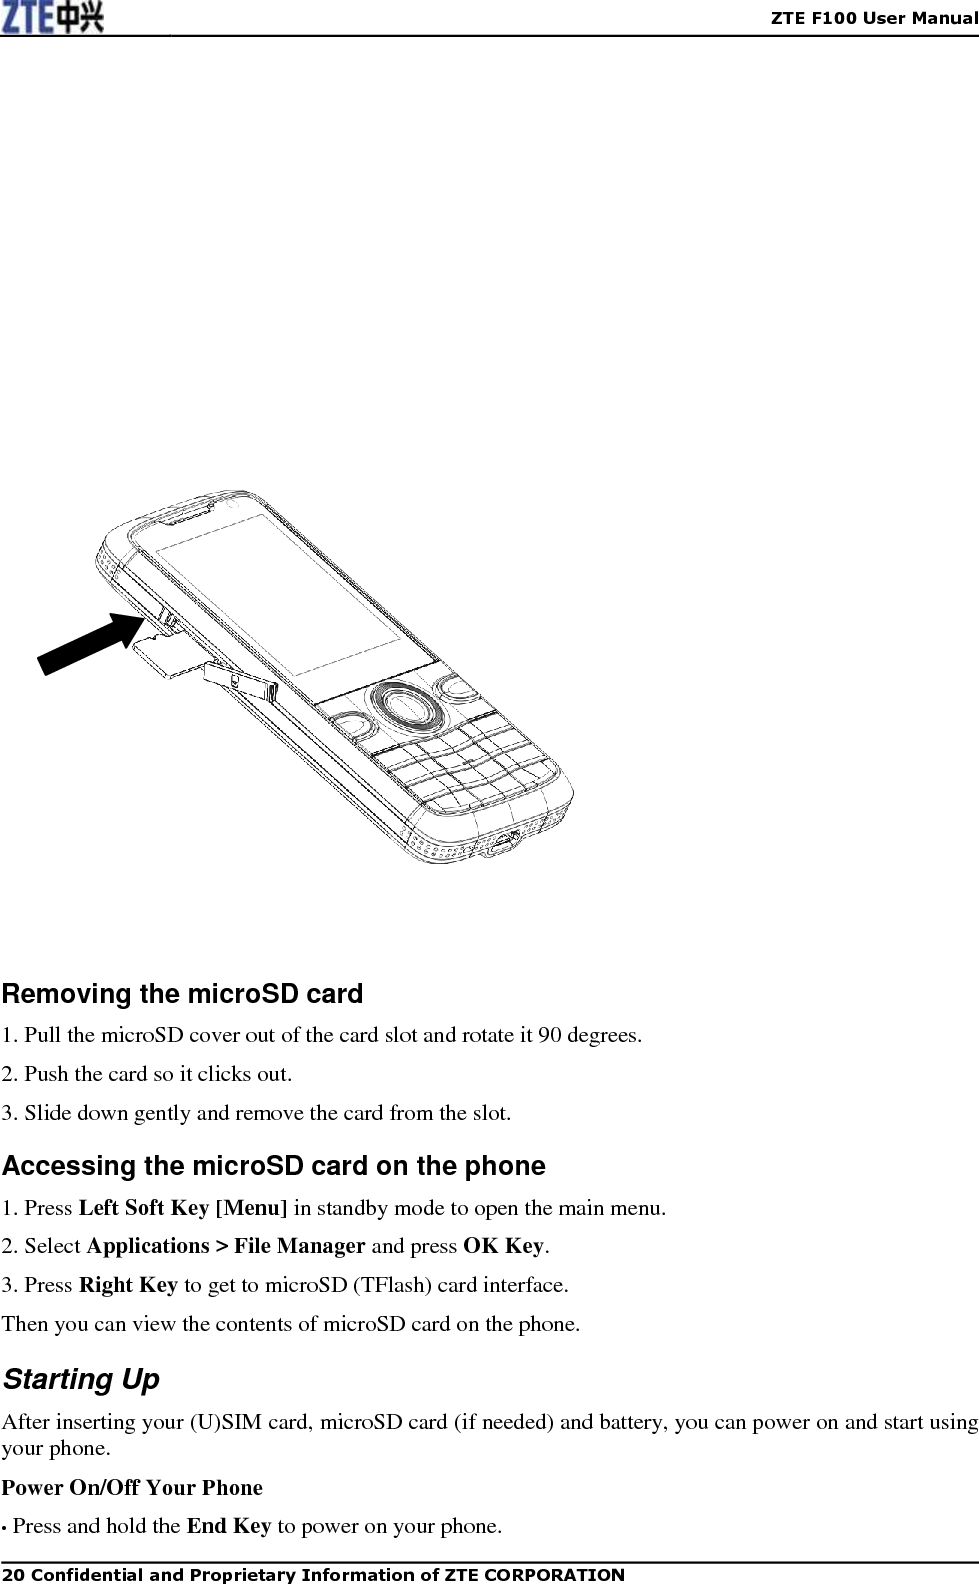    ZTE F100 User Manual   20 Confidential and Proprietary Information of ZTE CORPORATION                       Removing the microSD card 1. Pull the microSD cover out of the card slot and rotate it 90 degrees. 2. Push the card so it clicks out. 3. Slide down gently and remove the card from the slot. Accessing the microSD card on the phone 1. Press Left Soft Key [Menu] in standby mode to open the main menu. 2. Select Applications &gt; File Manager and press OK Key. 3. Press Right Key to get to microSD (TFlash) card interface. Then you can view the contents of microSD card on the phone. Starting Up After inserting your (U)SIM card, microSD card (if needed) and battery, you can power on and start using your phone. Power On/Off Your Phone • Press and hold the End Key to power on your phone. 